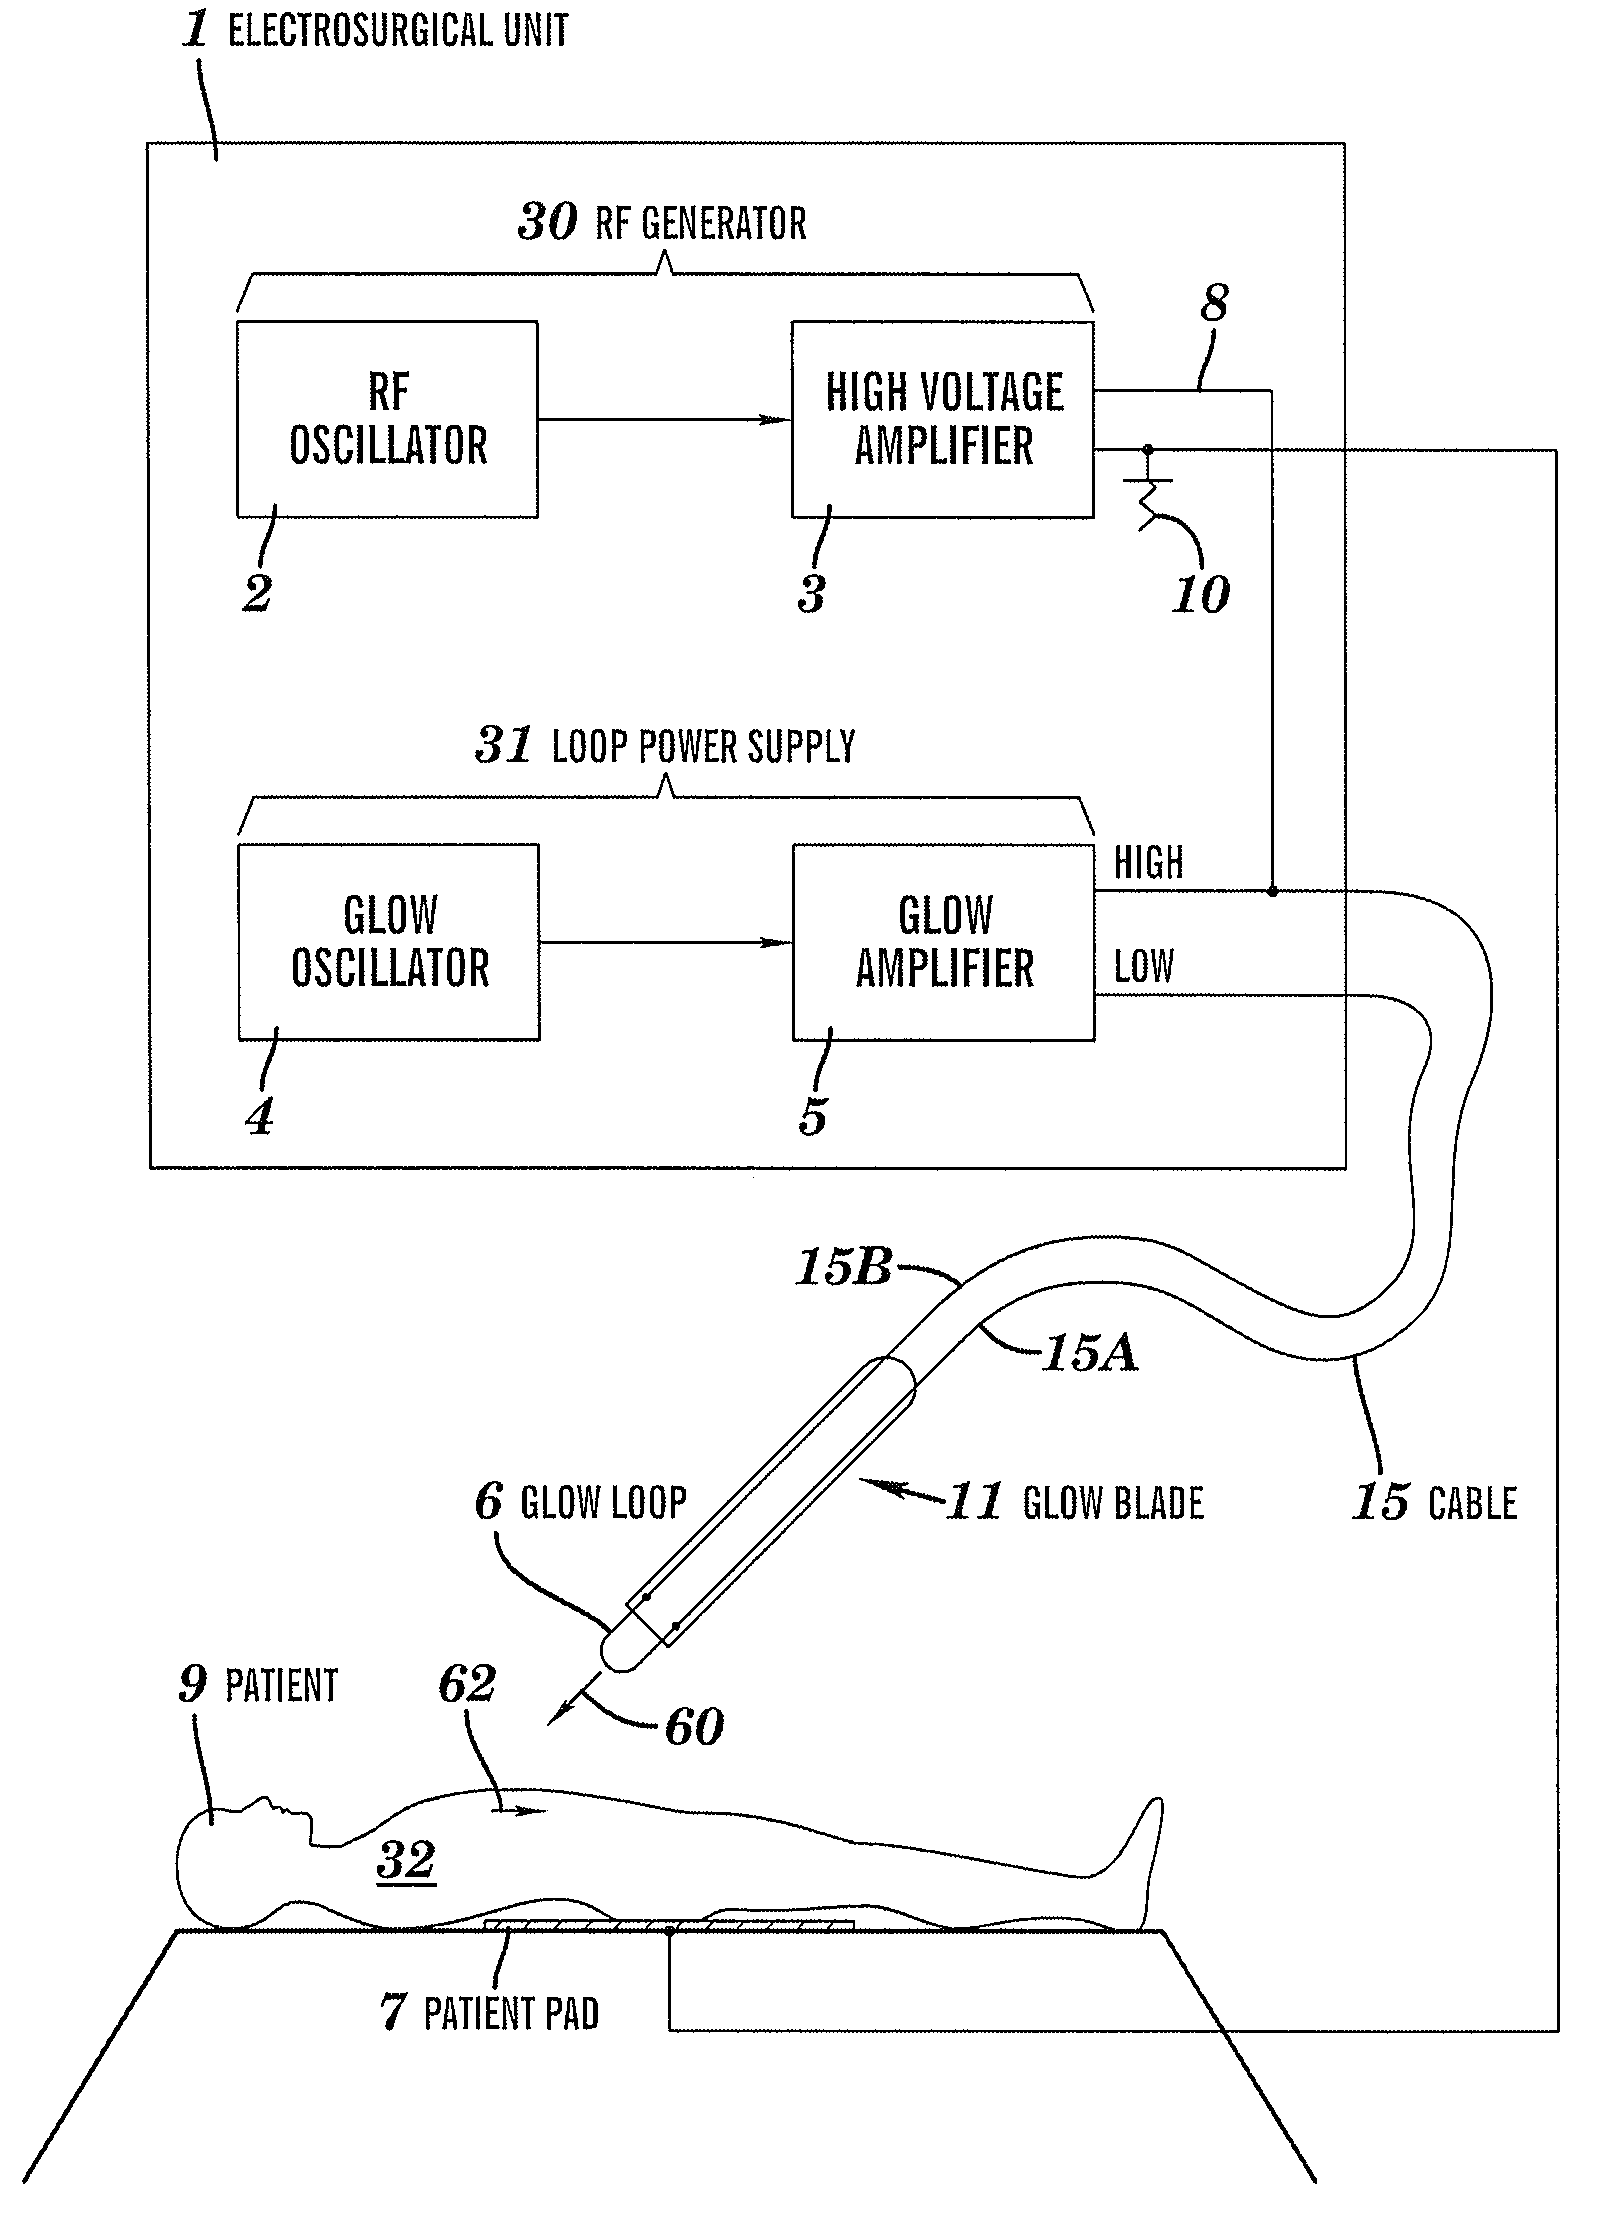 High efficiency, precision electrosurgical apparatus and method